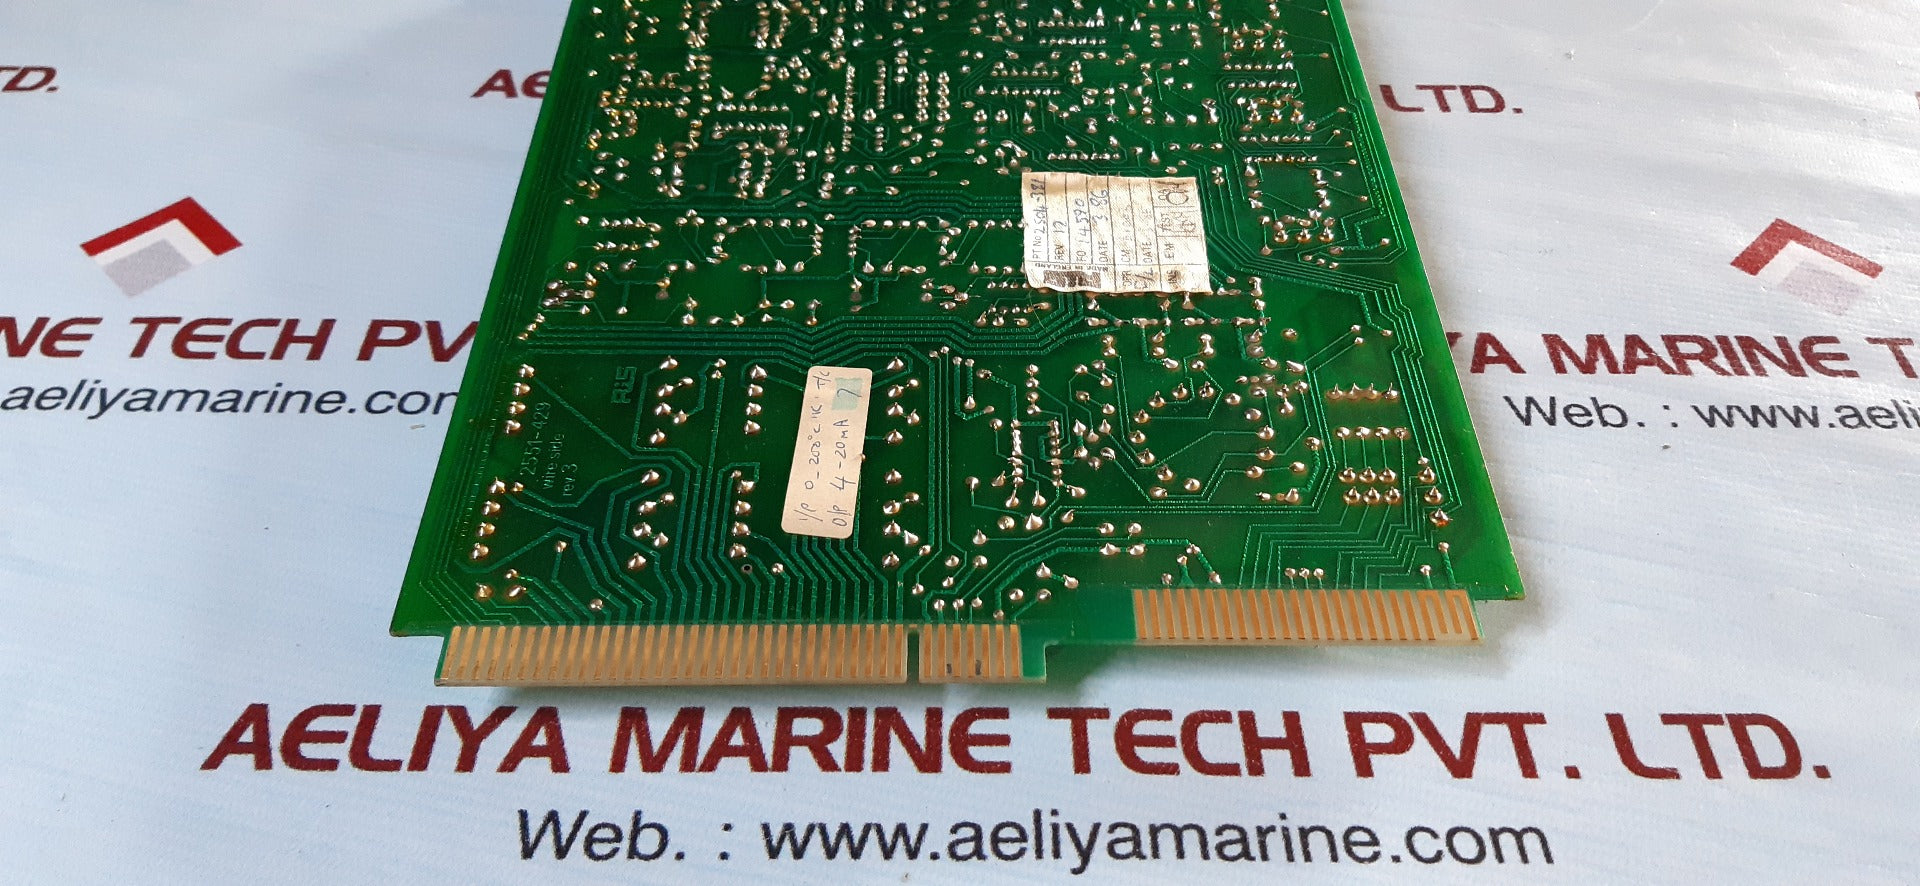 Rochester instruments 2504-381 pcb card 2551-429